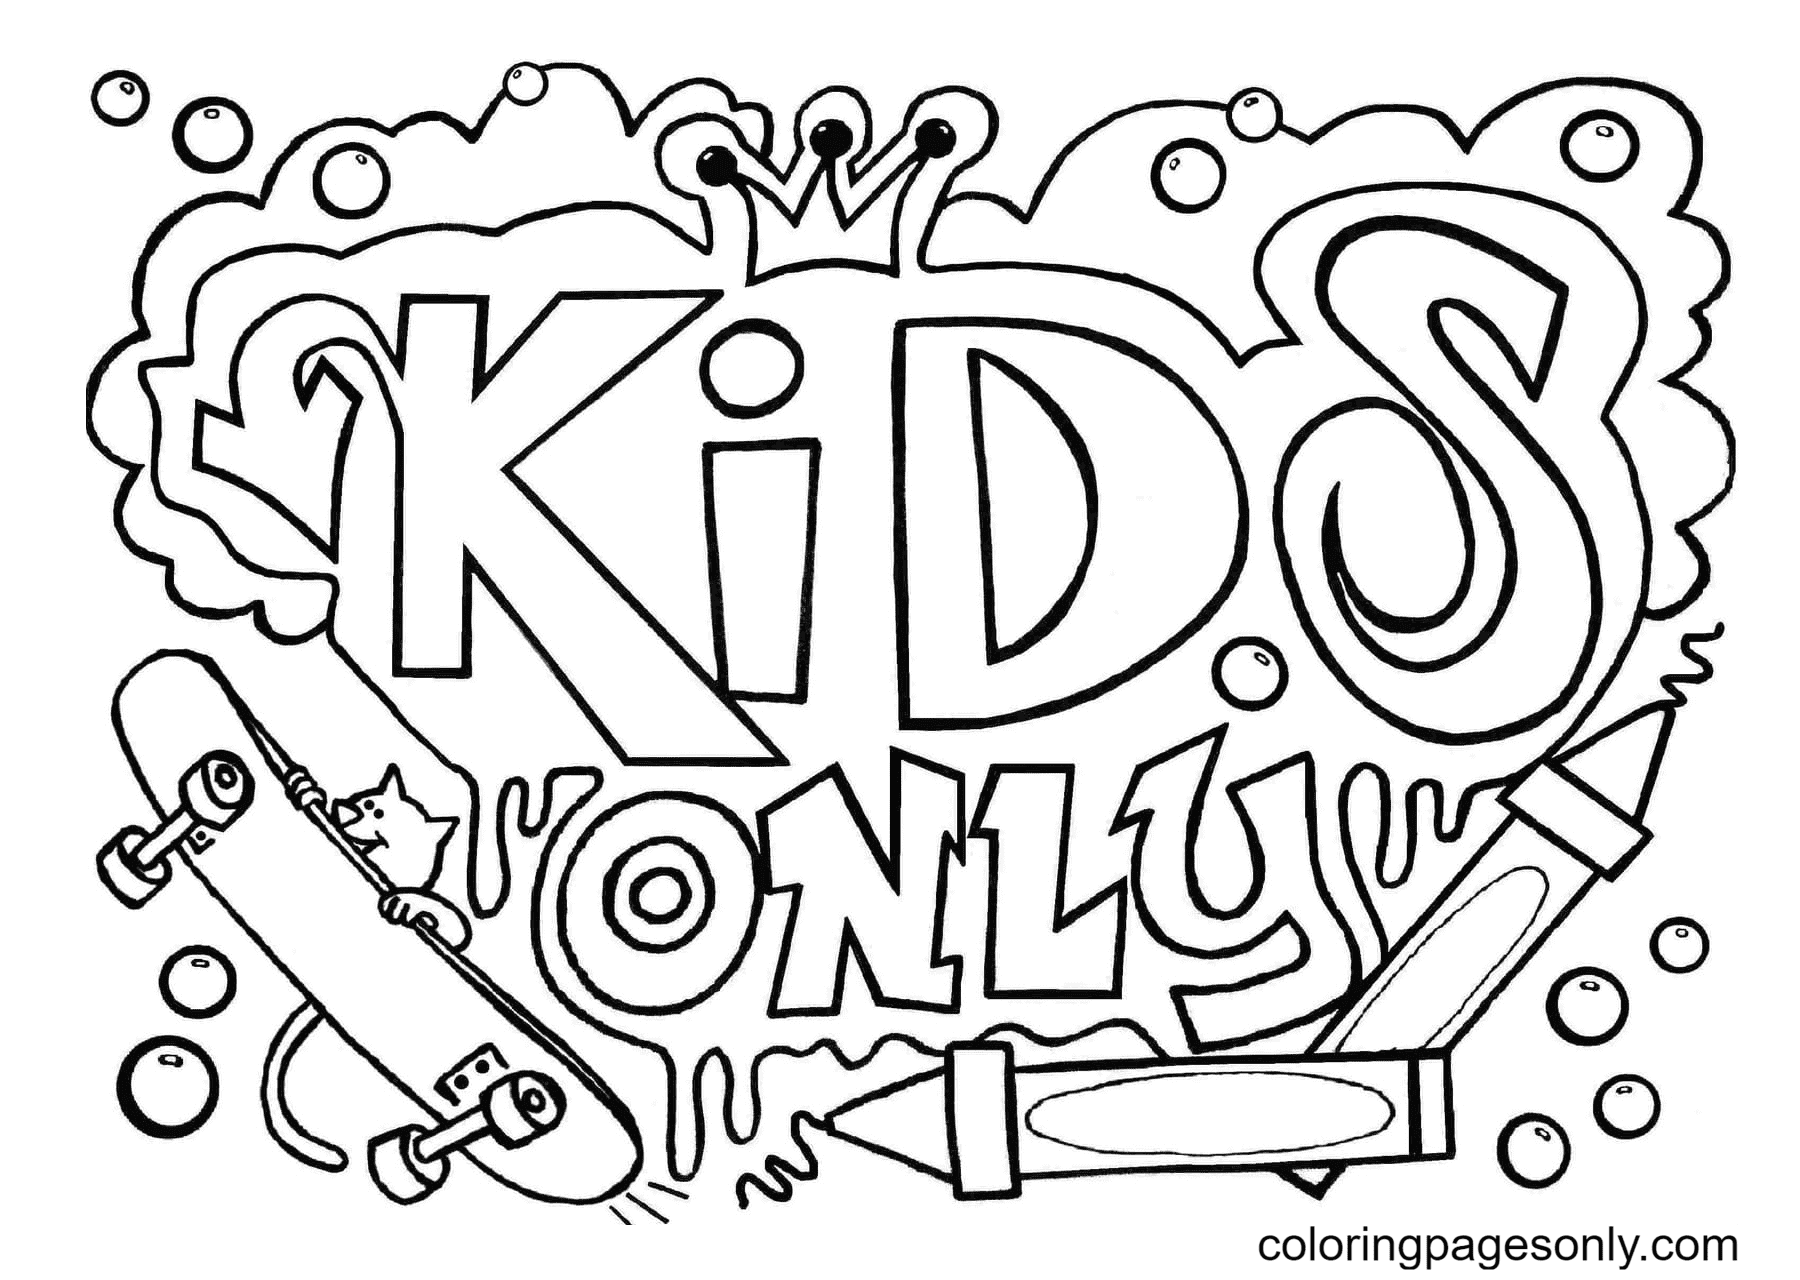 Kids only Coloring Pages   Graffiti Coloring Pages   Coloring ...